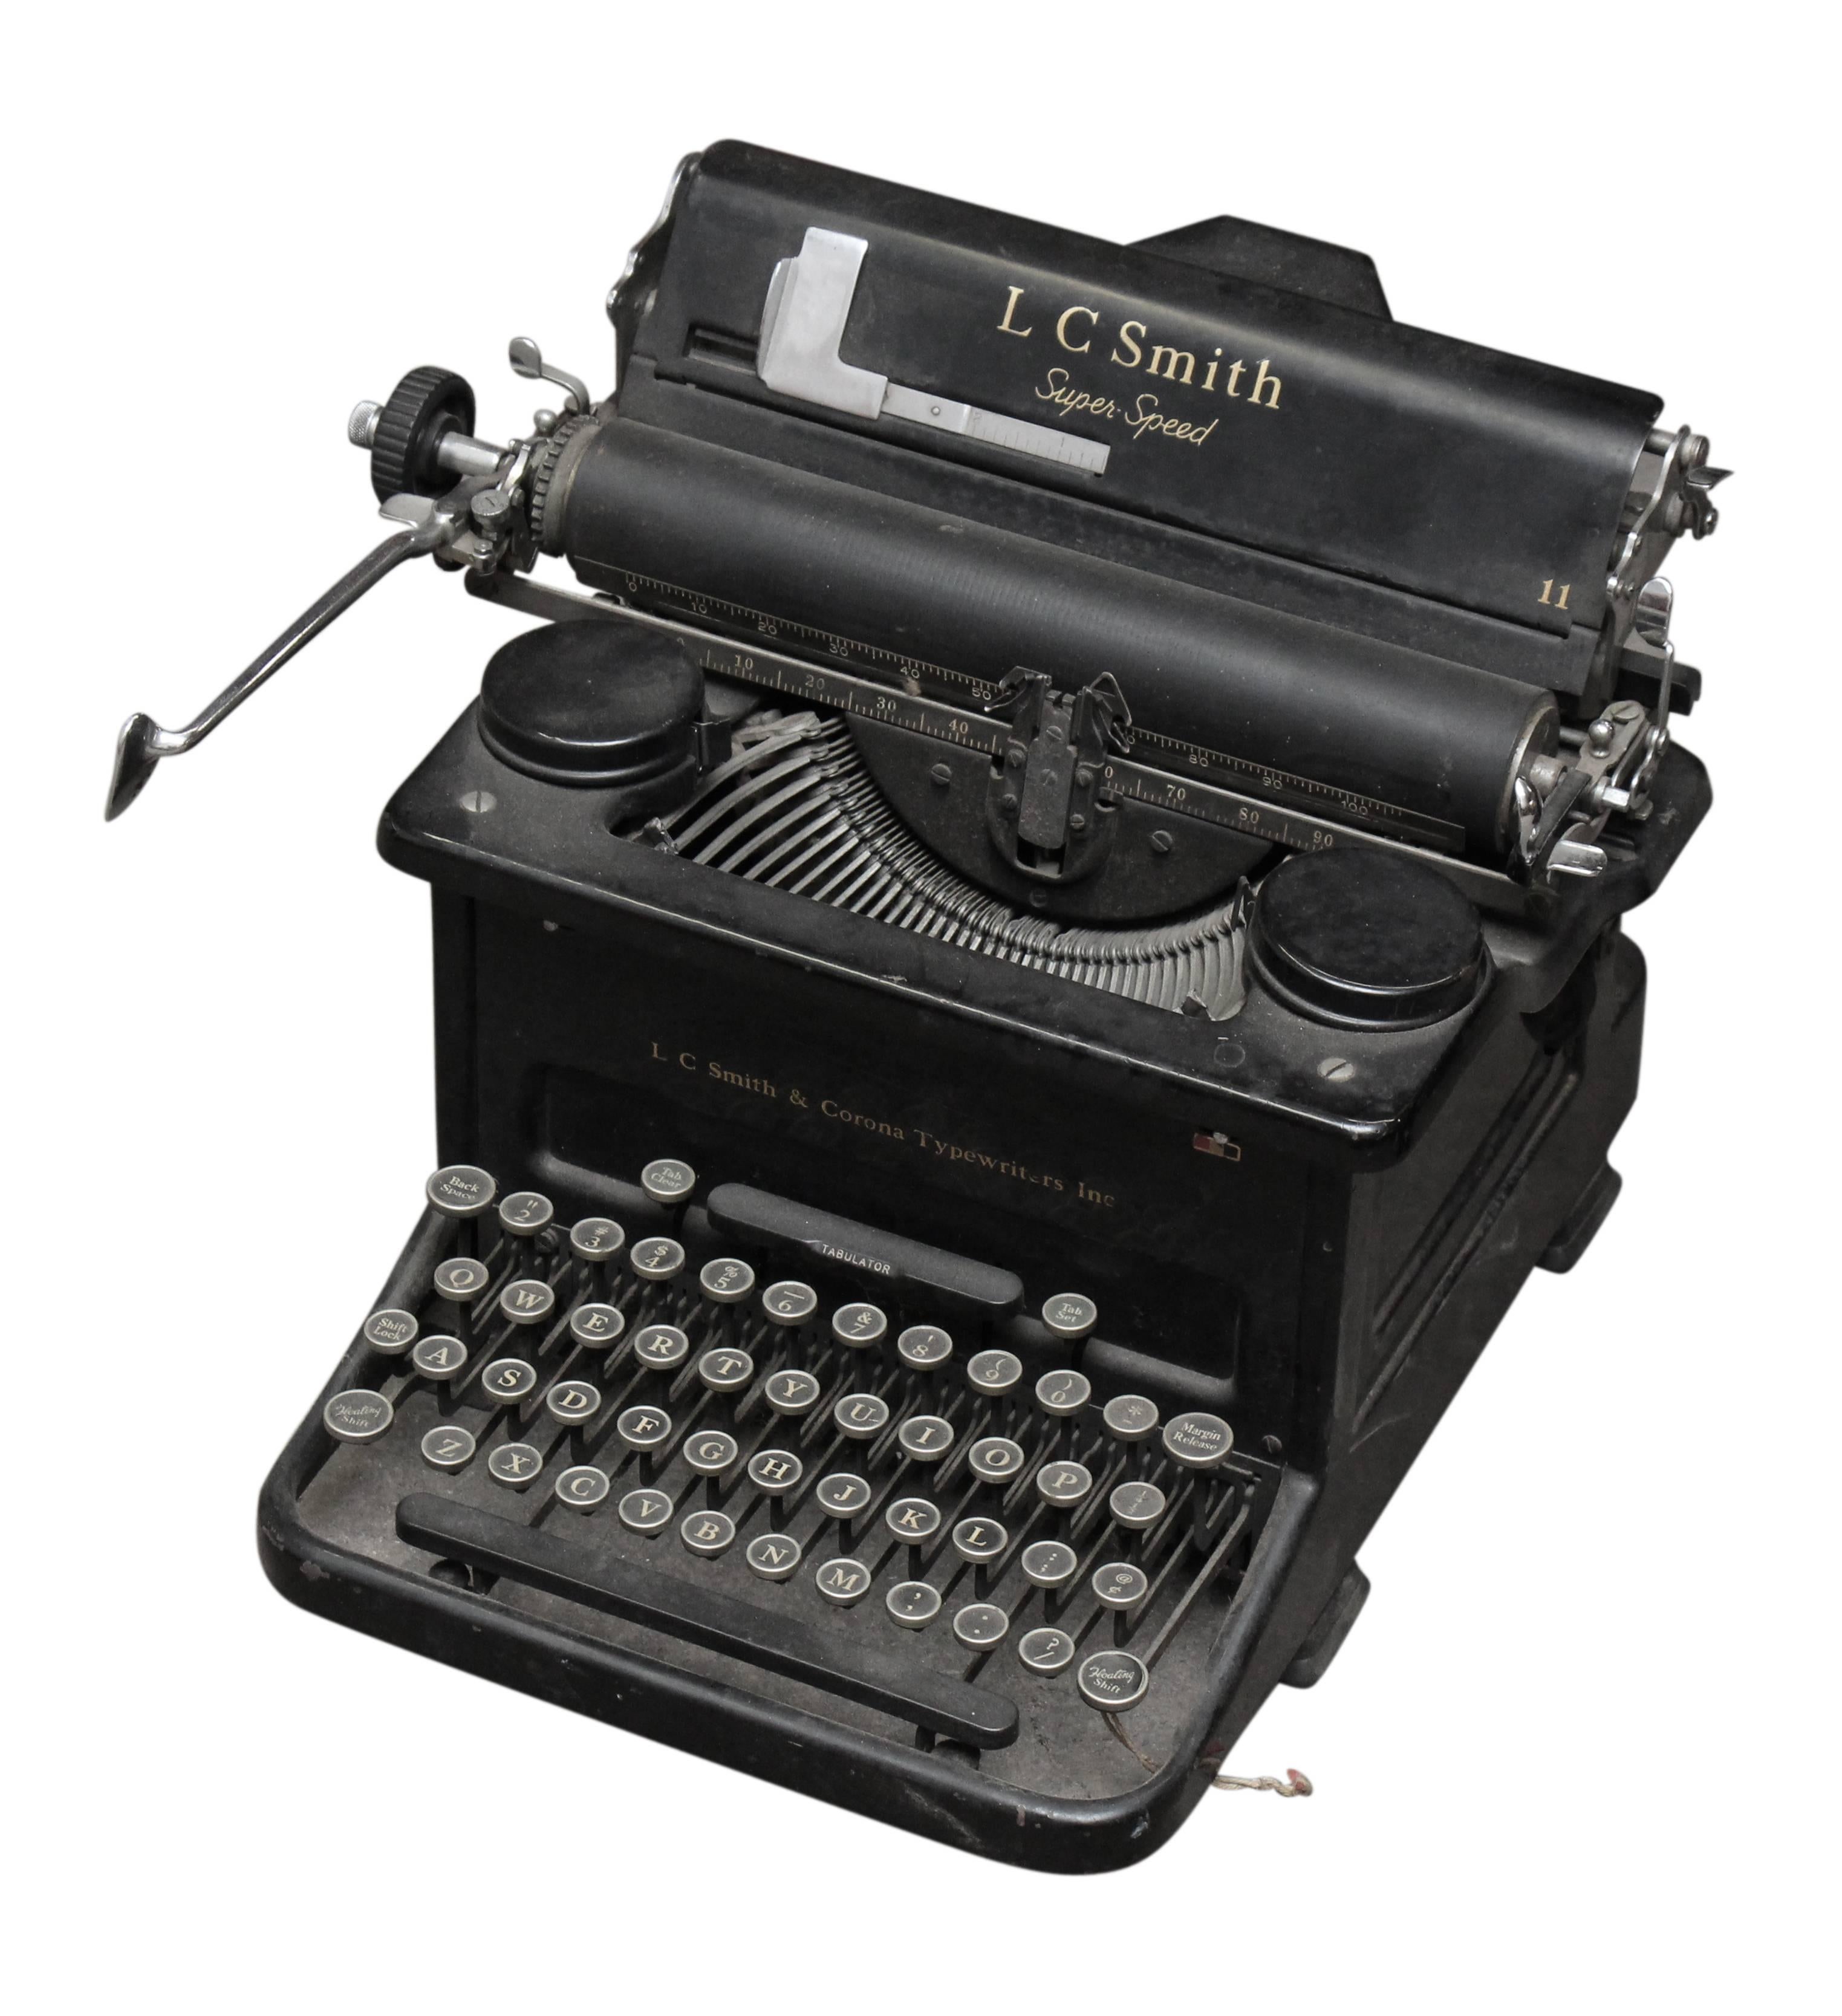 Fabulous antique typewriter. Made by L.C. Smith & Corona Inc. in 1938. This is the super speed model. This item can be seen at our 302 Bowery location in Manhattan.